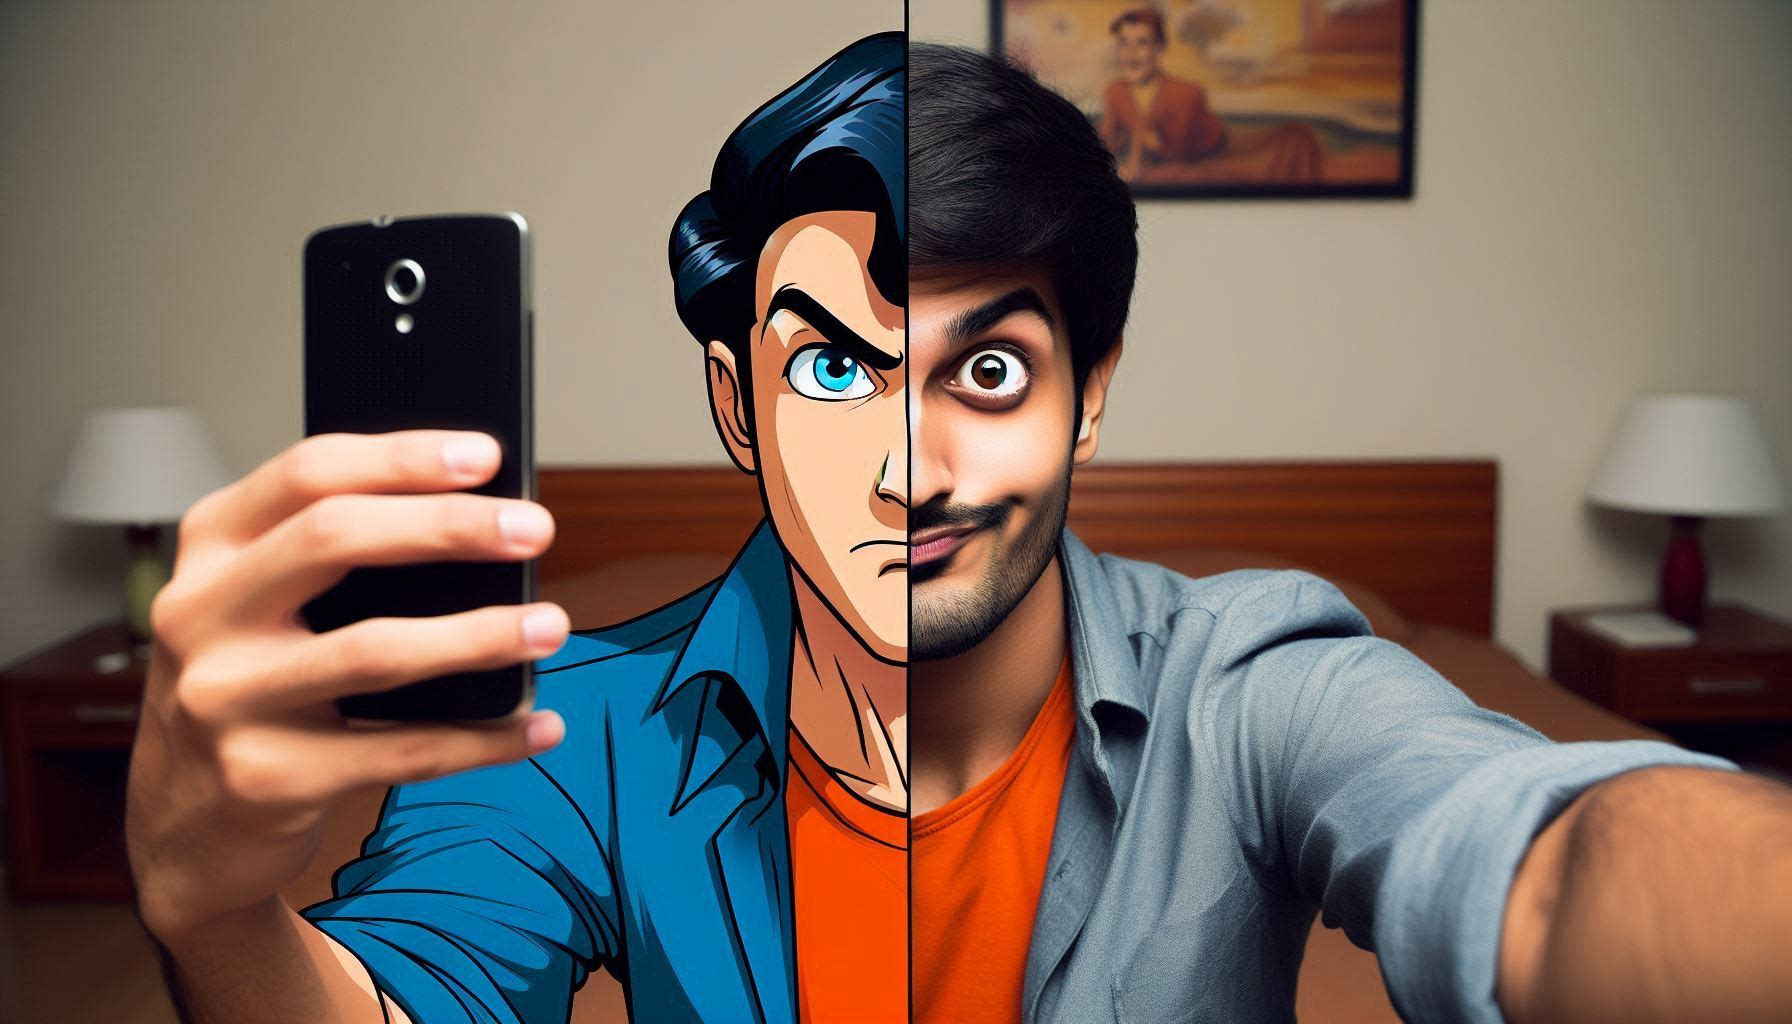 Humorous face swap image showing a person taking a selfie on one side and the same person with a famous cartoon character’s face on the other.